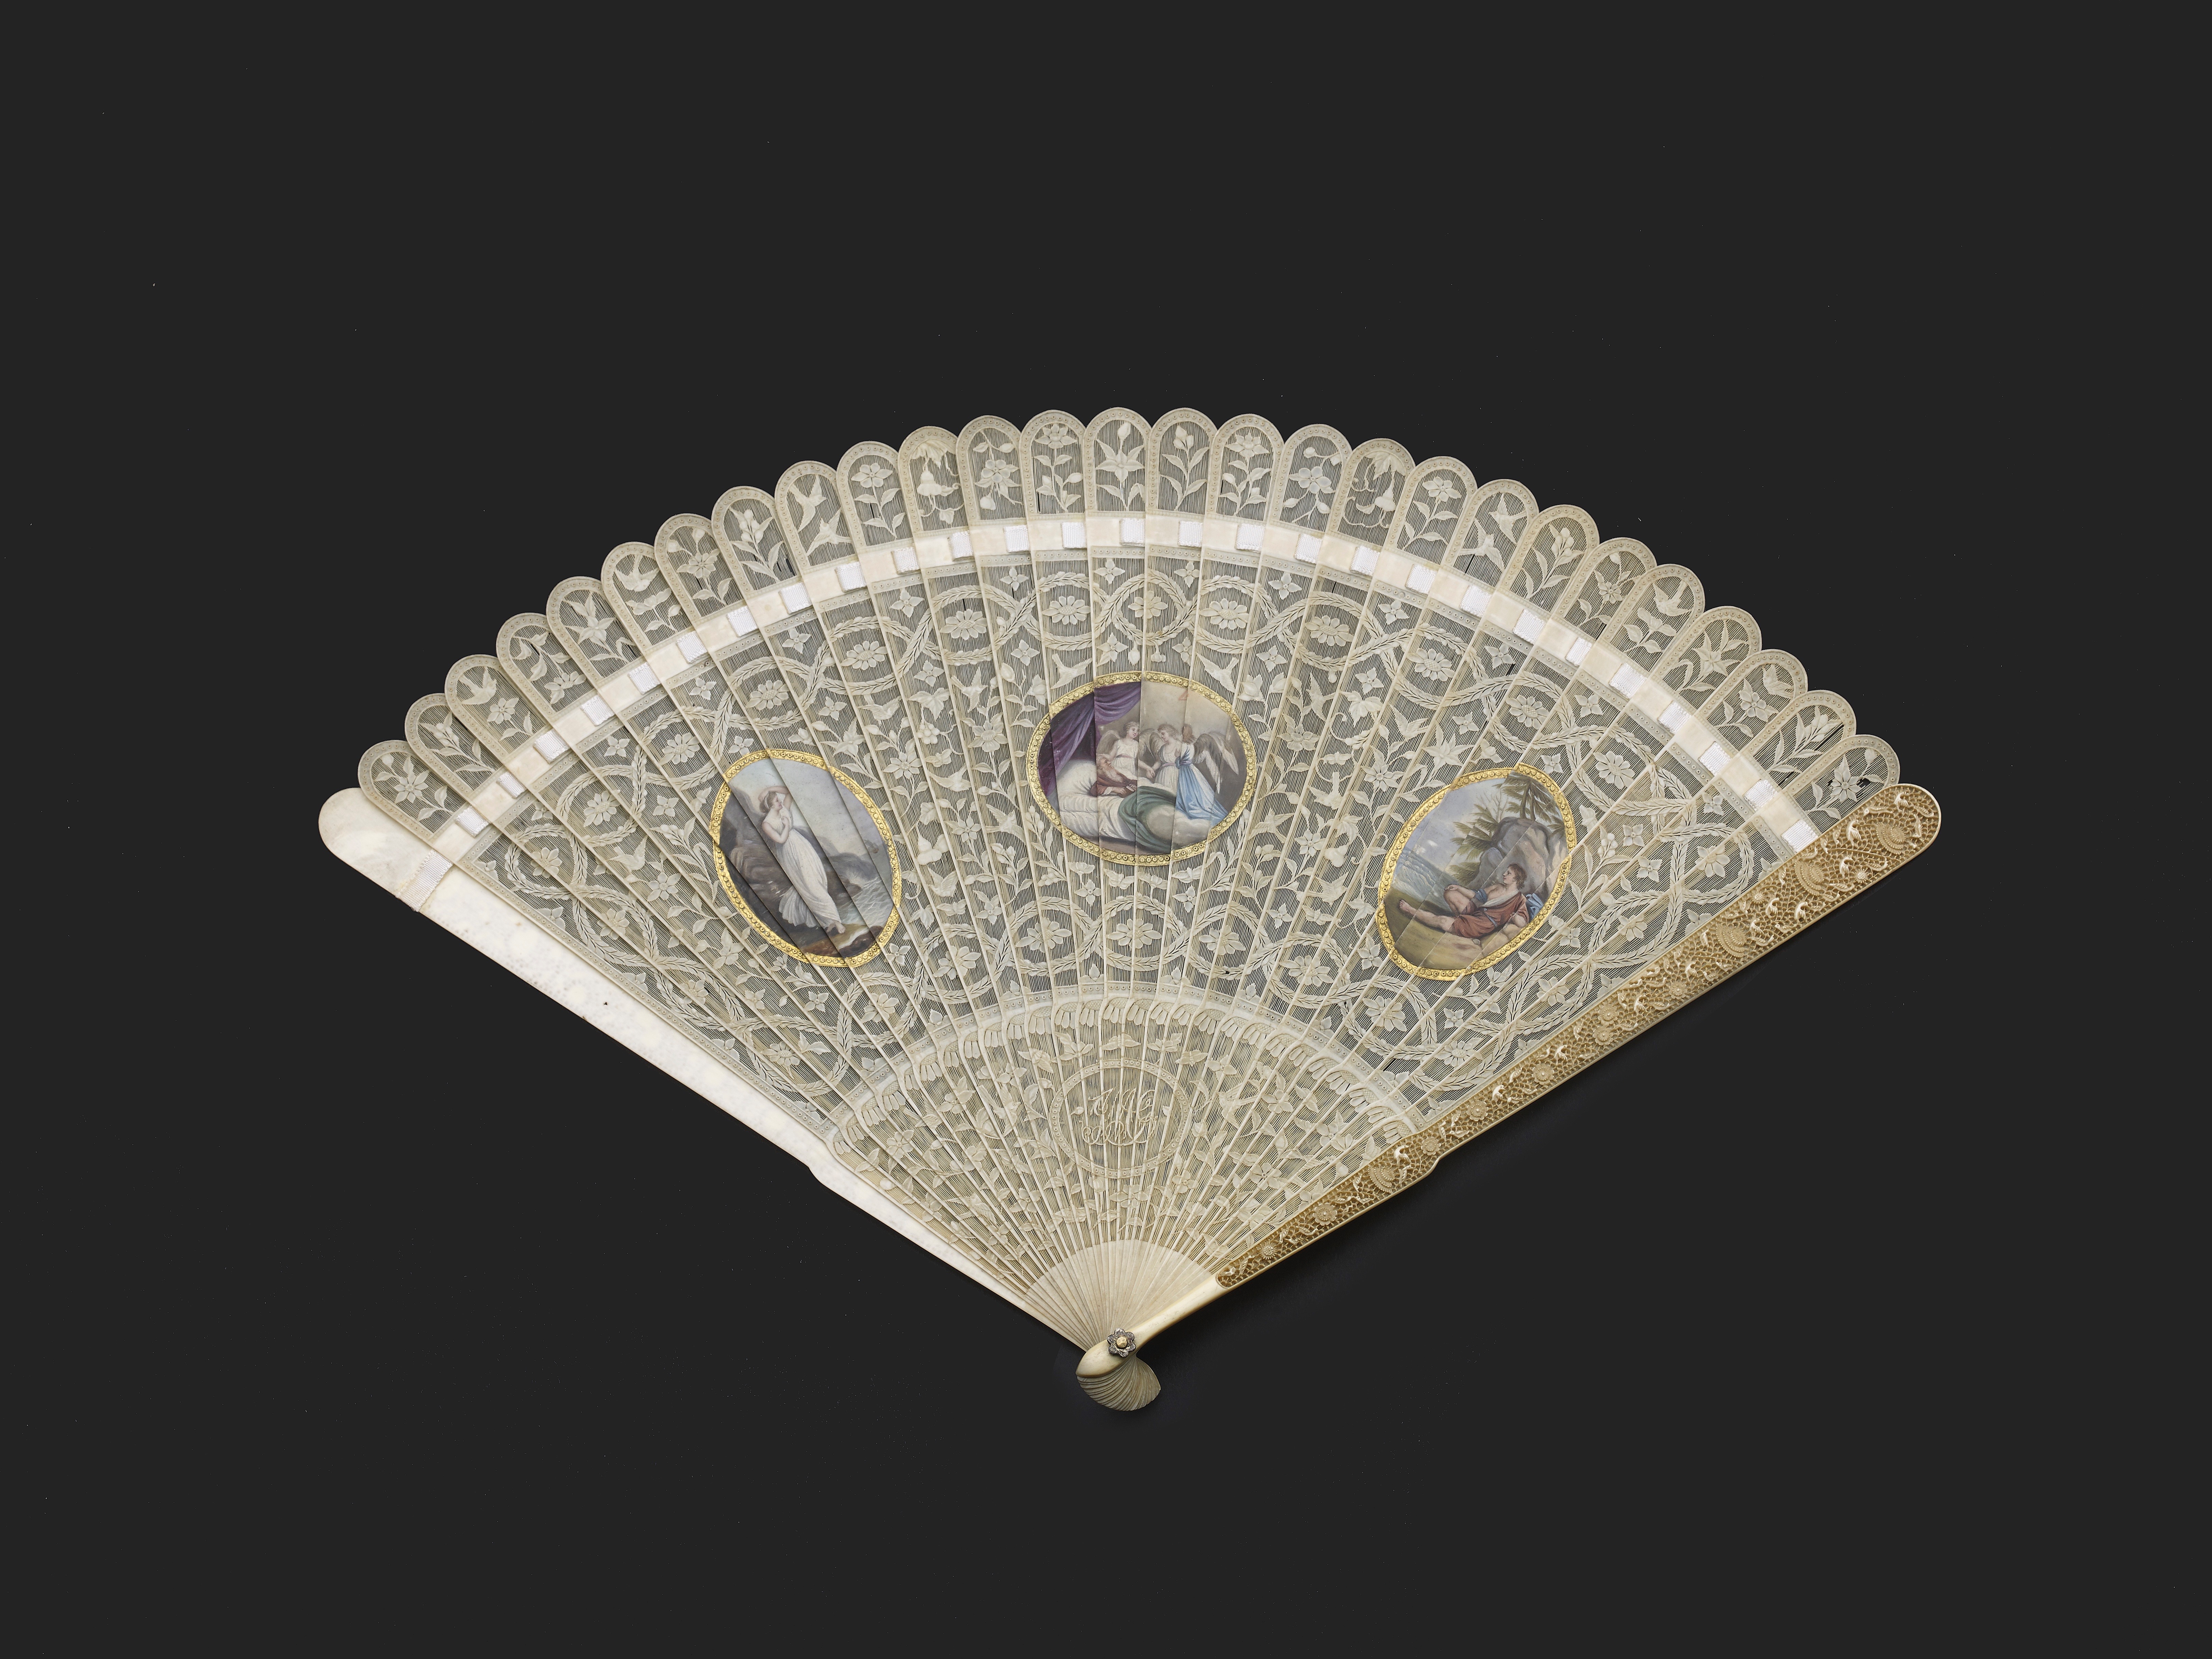 A RARE CHINESE EXPORT IVORY BRISE FAN, QING DYNASTY, QIANLONG PERIOD, CIRCA 1770-1780